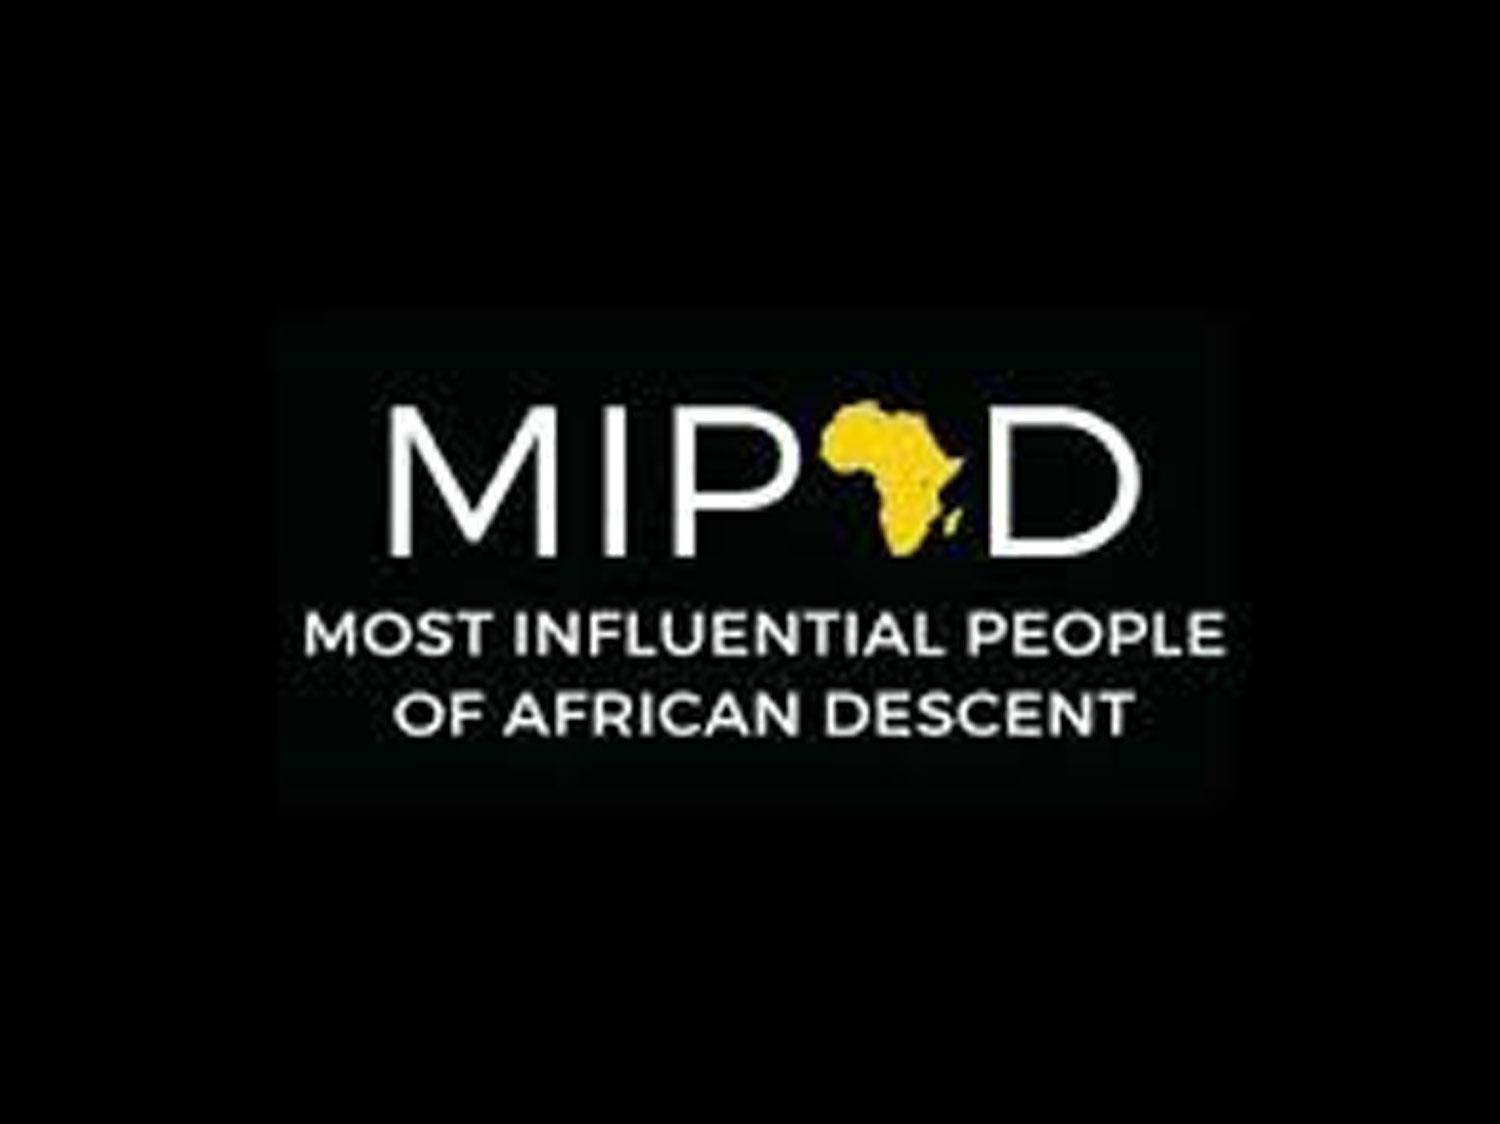 MIPAD - Most Influential People of African Descent